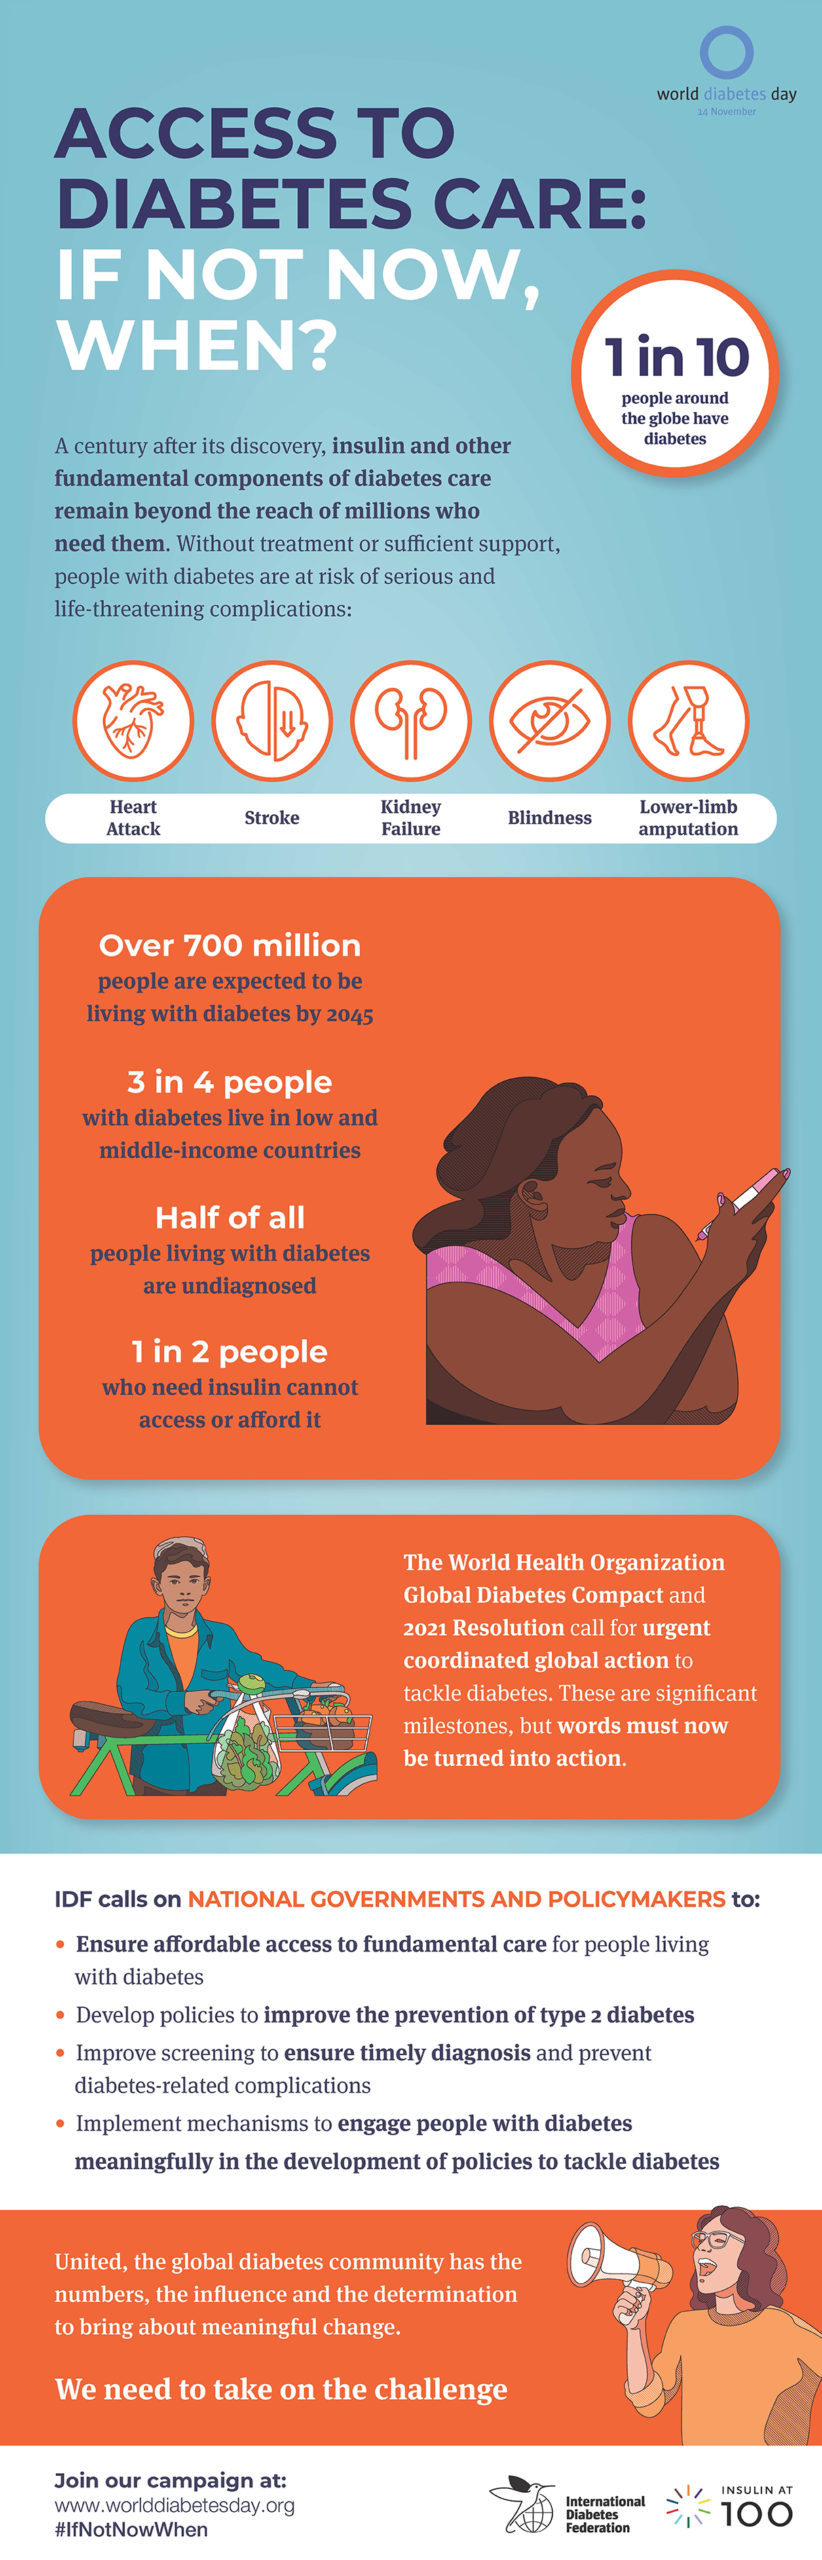 World Diabetes Day infographic